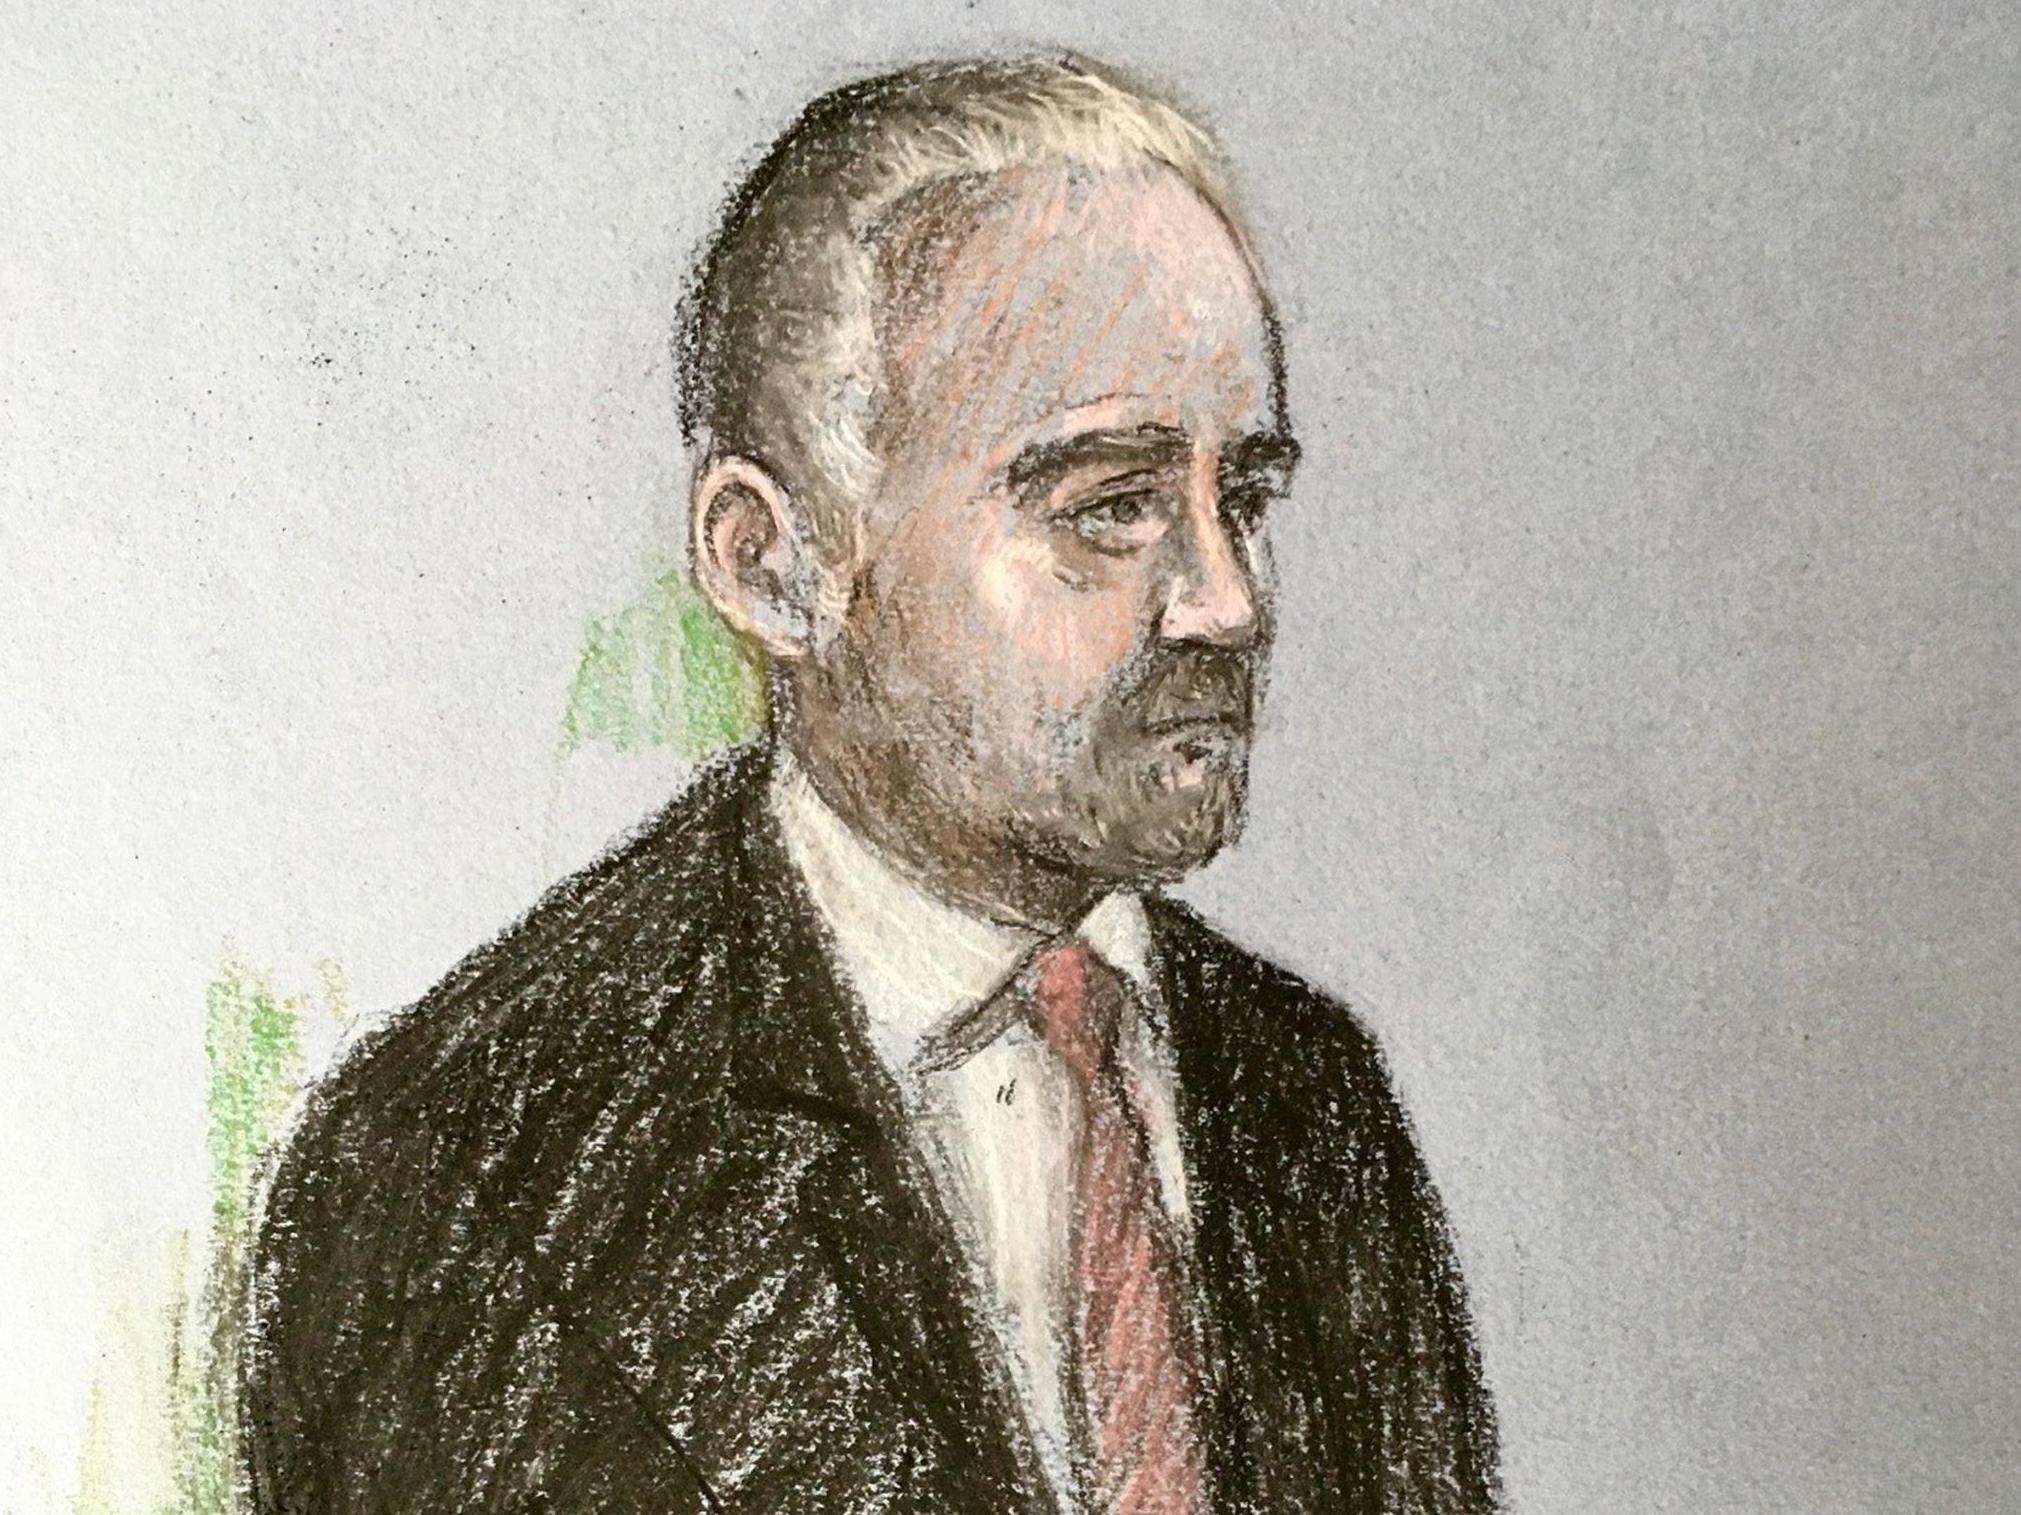 A sketch of Geraint Jones at Plymouth Magistrates’ Court